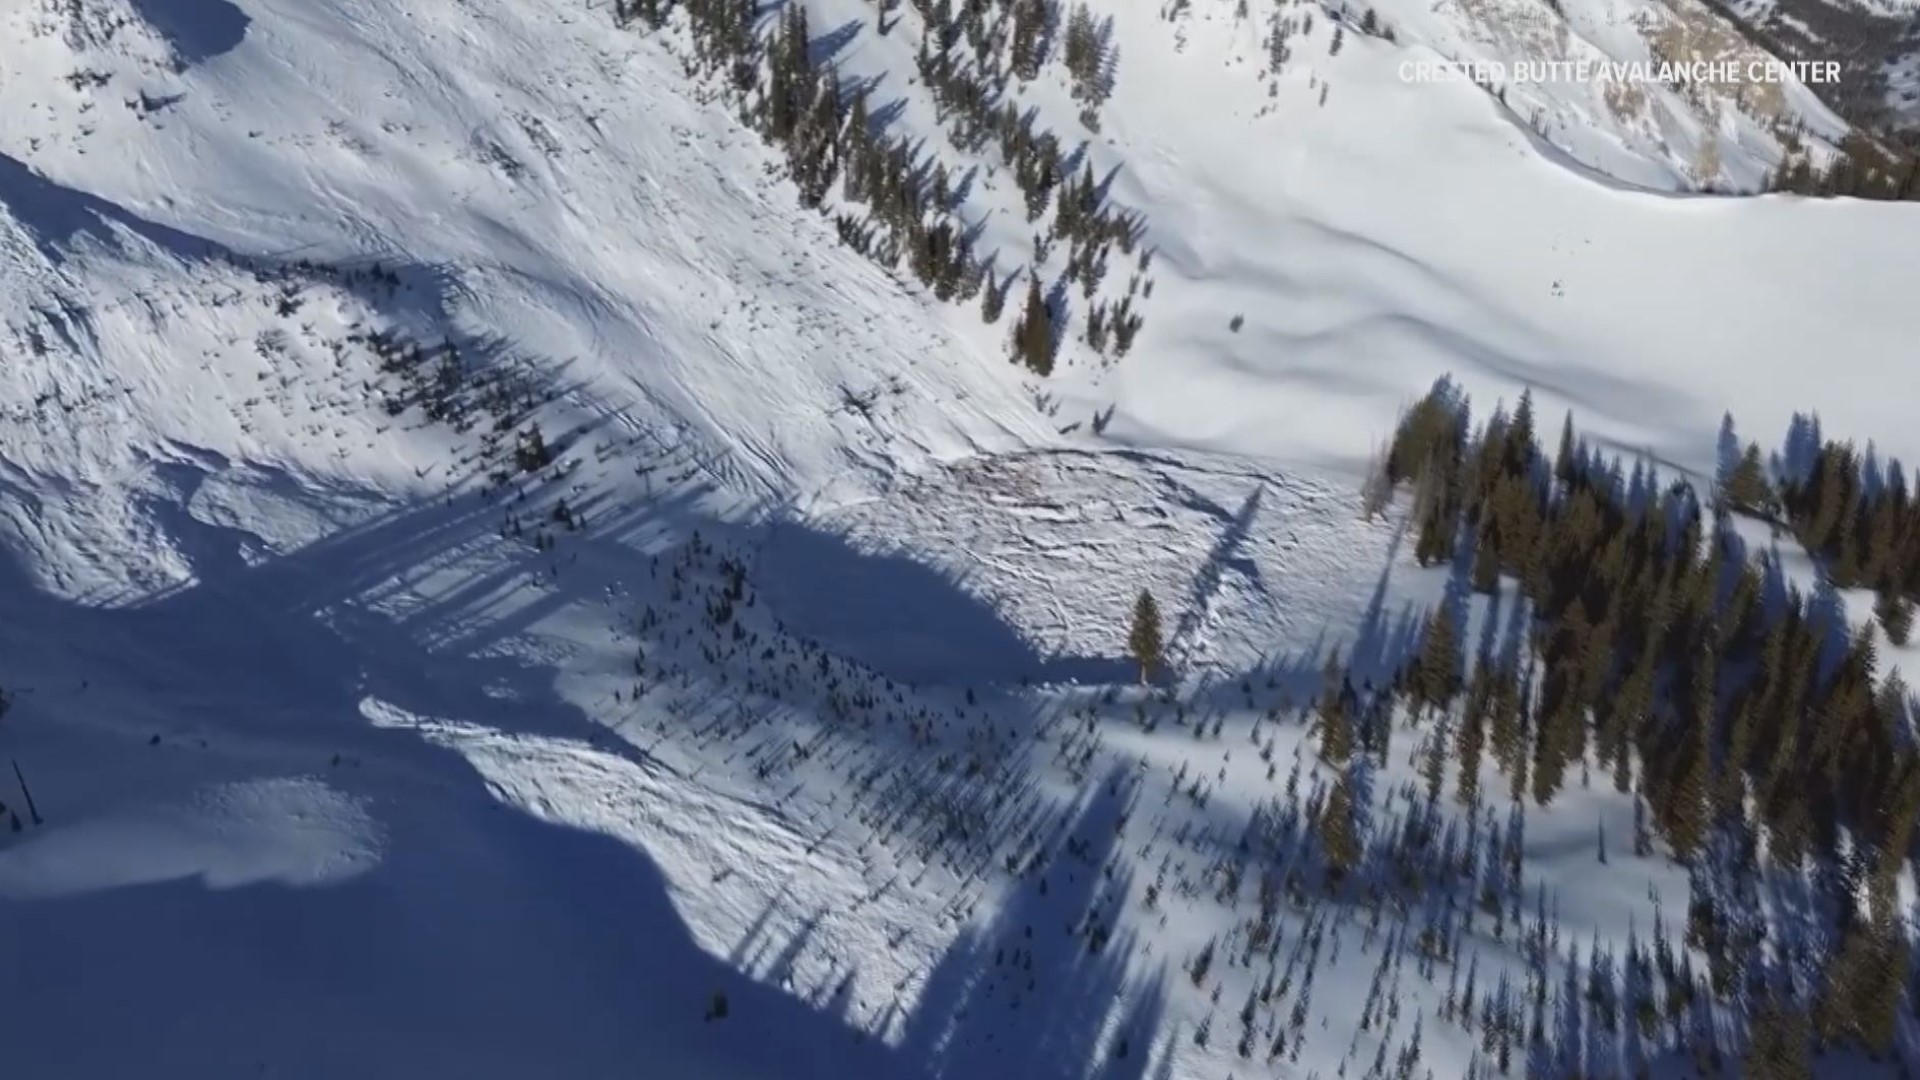 In Colorado, forecasters are warning that persistent slab avalanches — the most powerful and destructive type of avalanches — are happening in throughout the state.